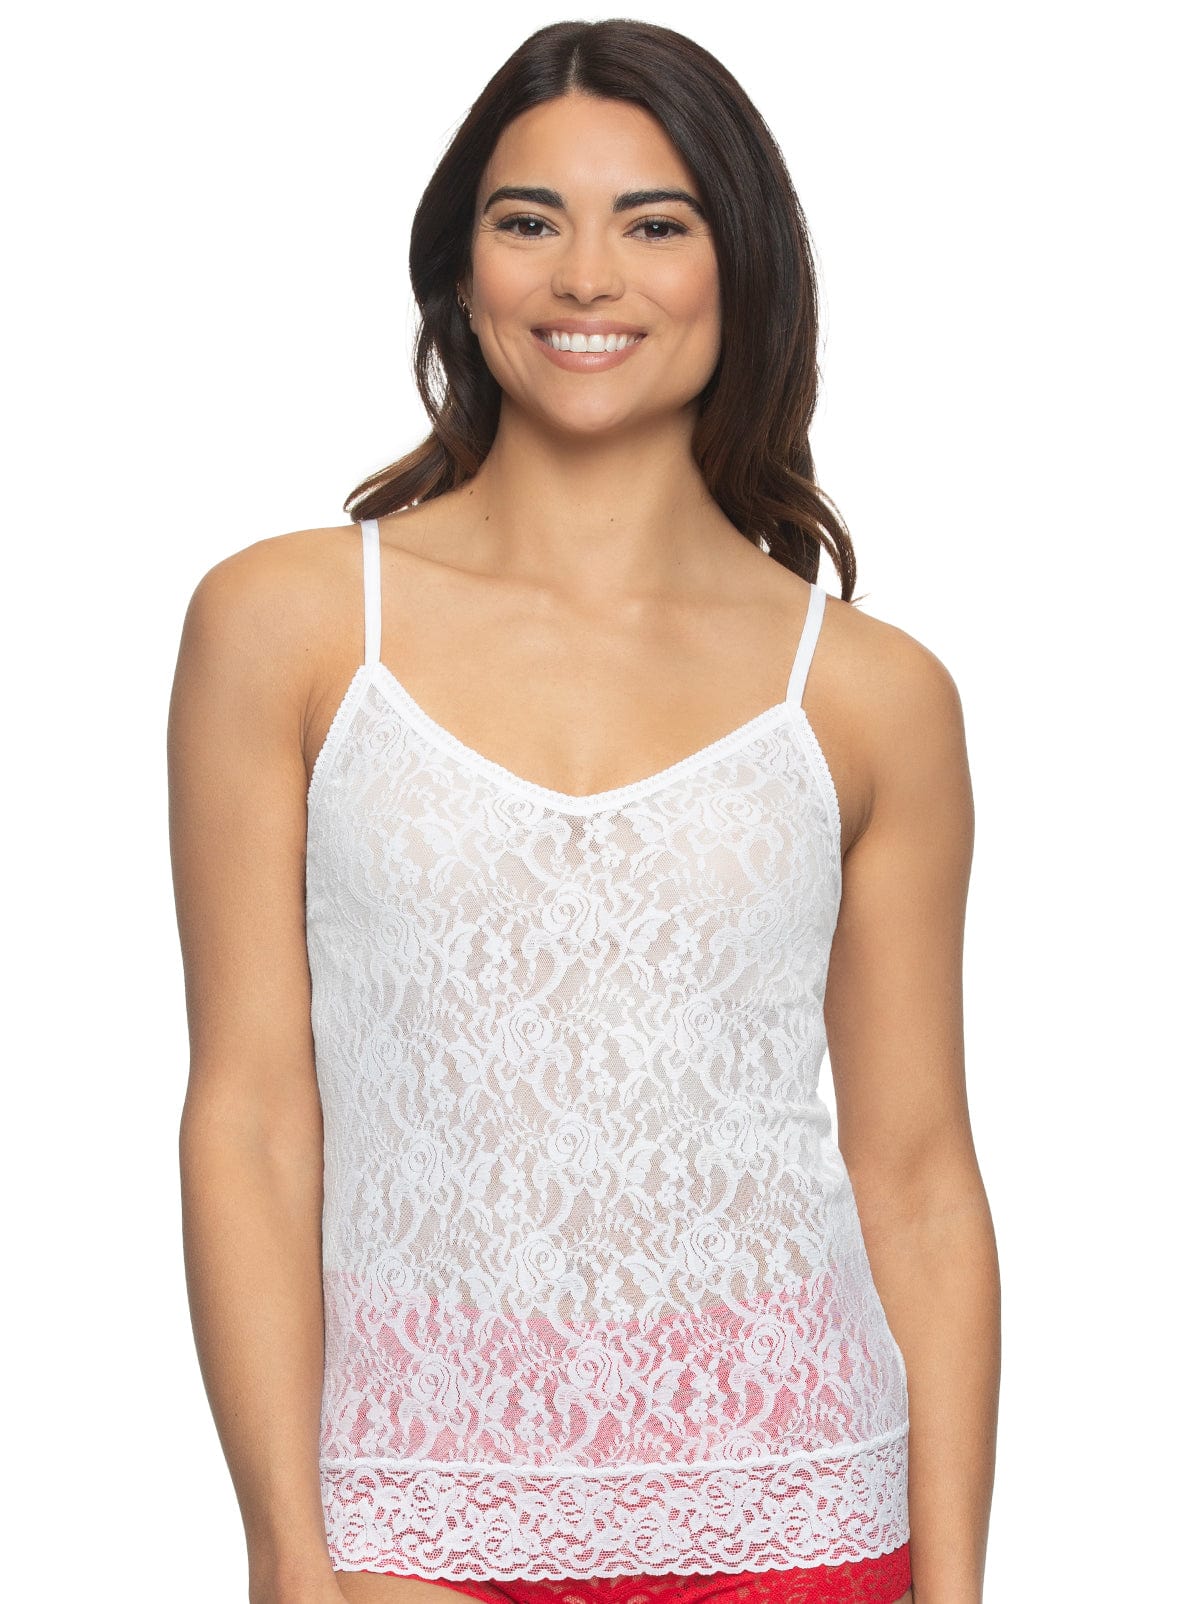 Stretch Lace Low Back Camisole  Lace camisole top, Stretch lace, Lace  camisole